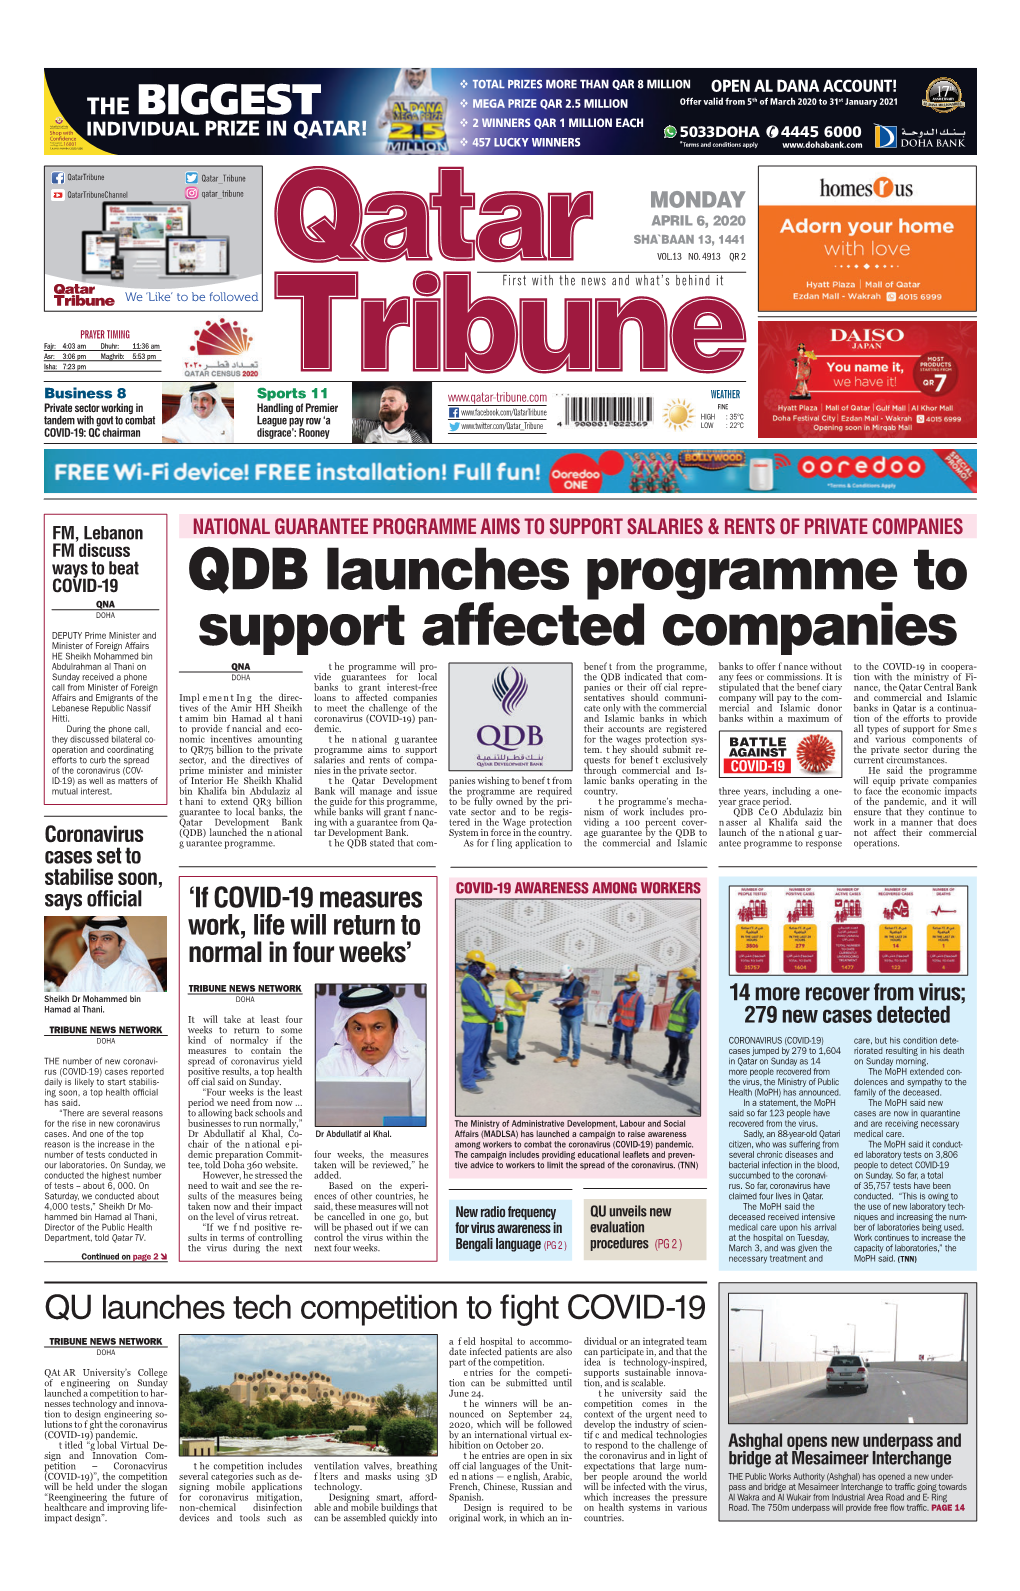 QDB Launches Programme to Support Affected Companies